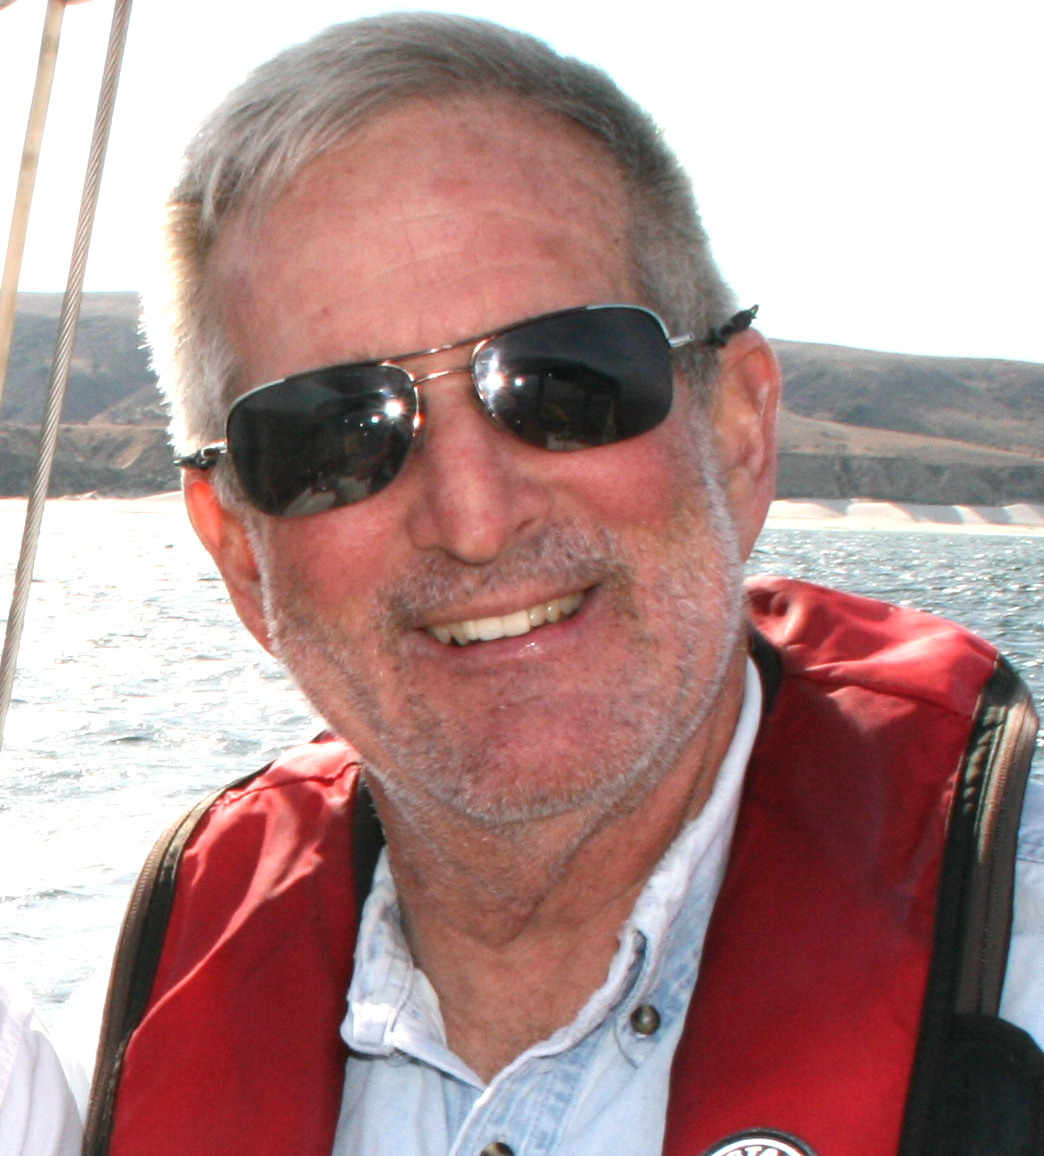 Capt. Dan Ryder is the owner of Sail Channel Islands